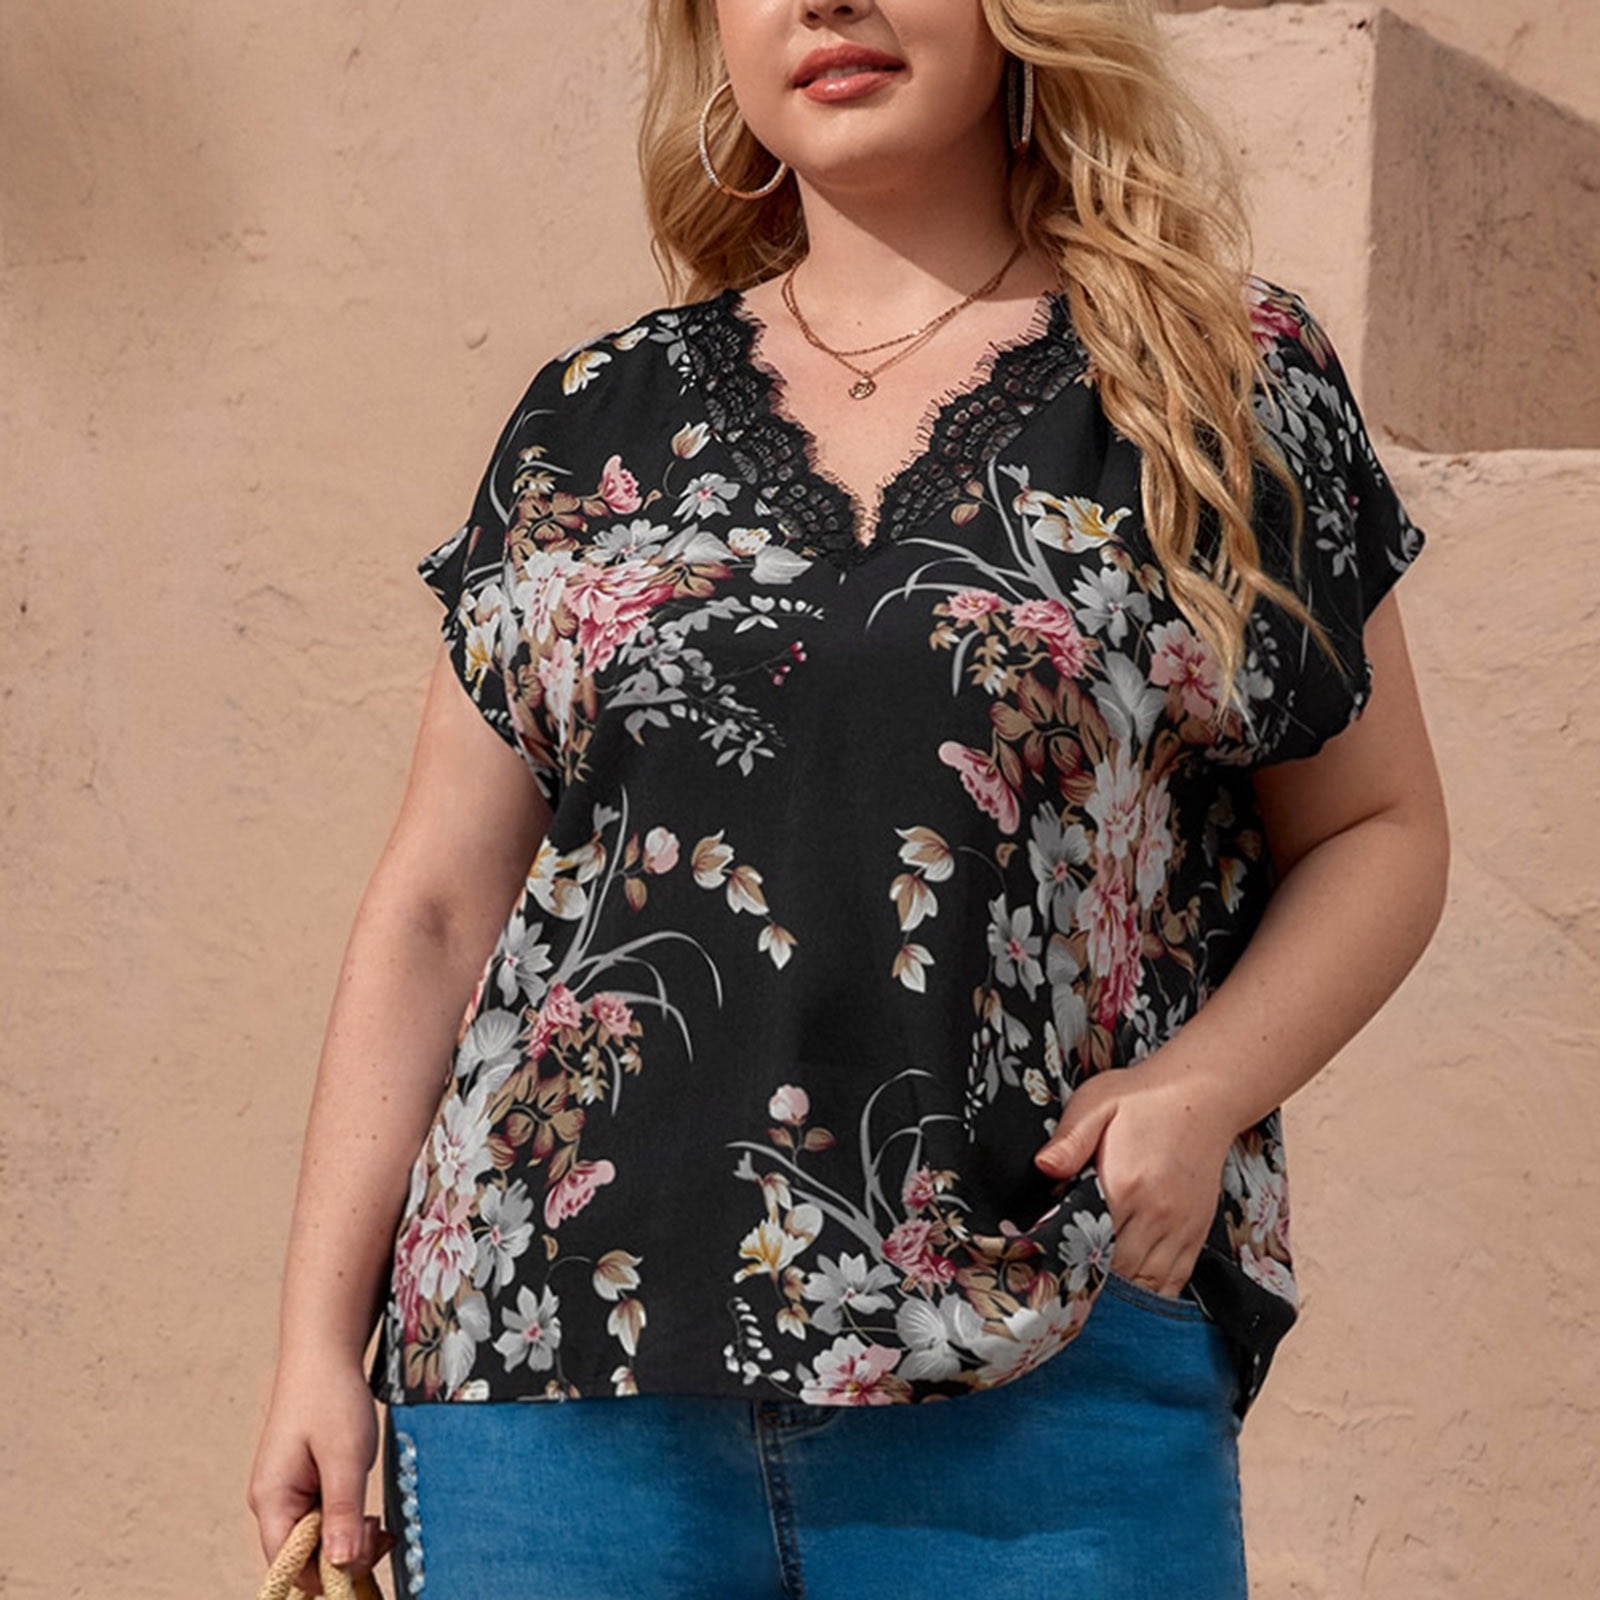 Plus Size Tops Women Solid Lace Stitching V-Neck Sleeve Casual Loose Boho Going Out Tops Blouse Walmart.com